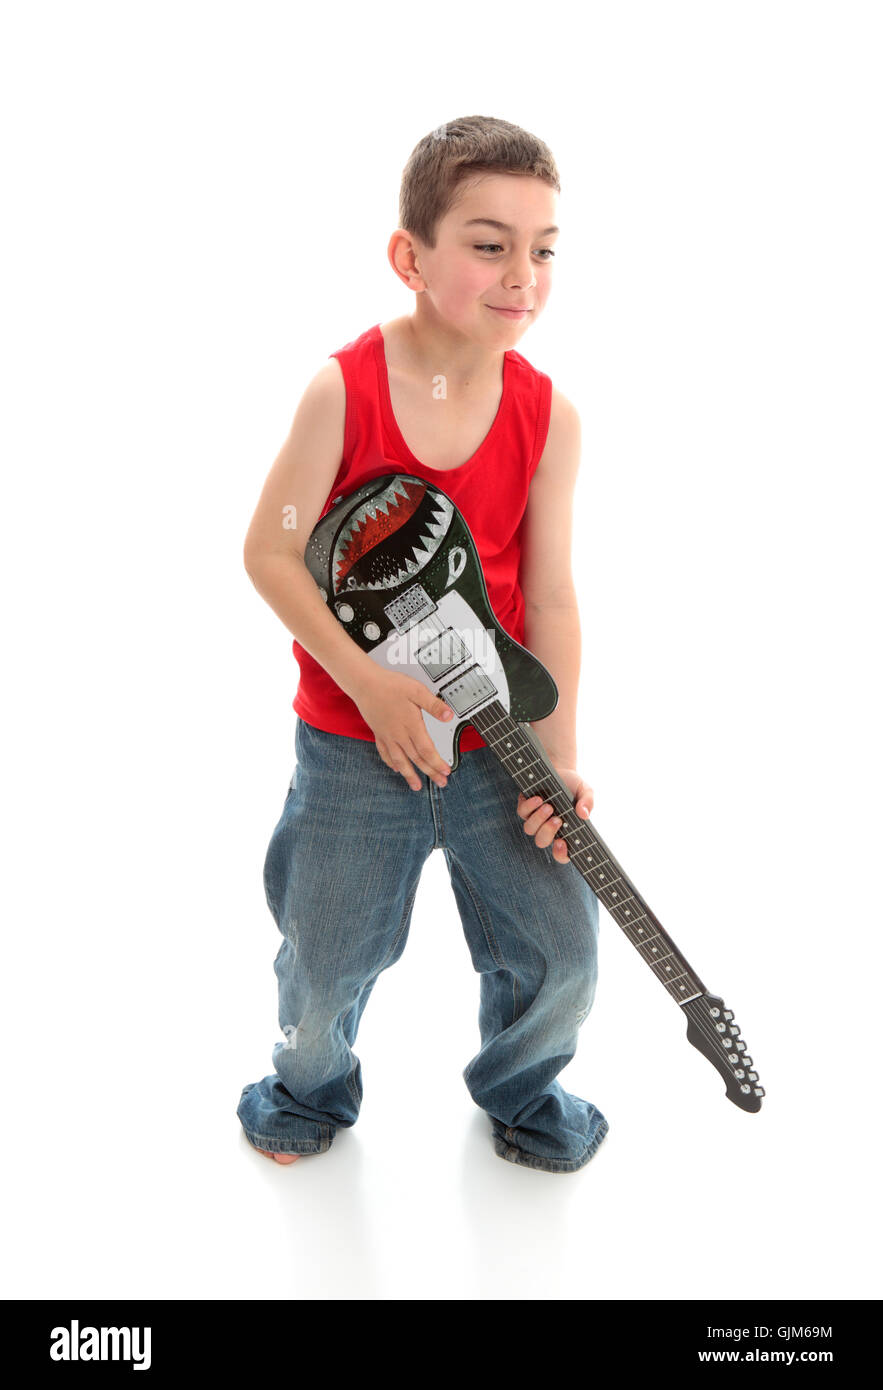 Little musician playing a guitar Stock Photo